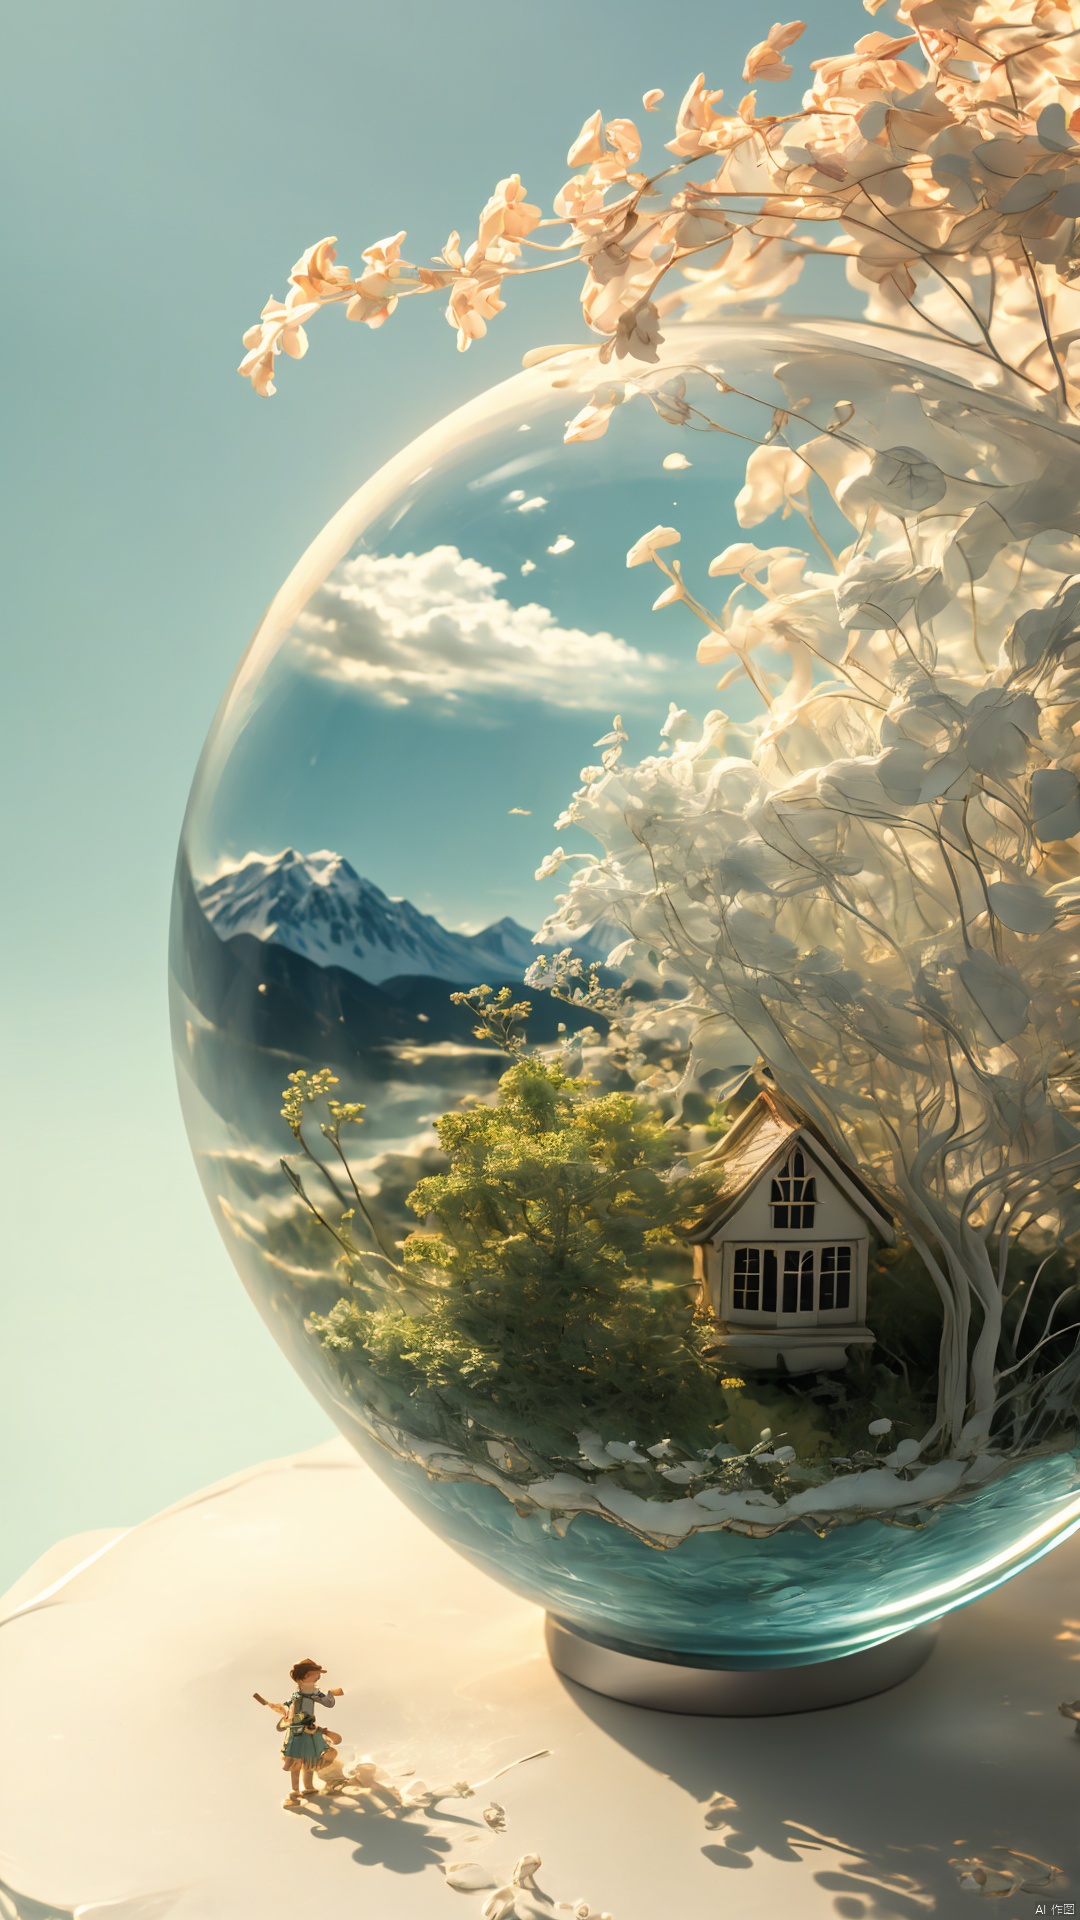  (best quality), (4k resolution), creative illustration of a miniature world on a white pedestal. The world is a green sphere with various natural and artificial elements. There is a river, trees, mountains, and a small house on the sphere. The image has a minimalist style with a light color palette that creates a contrast with the white background. The image gives a sense of wonder and curiosity about the tiny world and its inhabitants.,ff14bg,High detailed